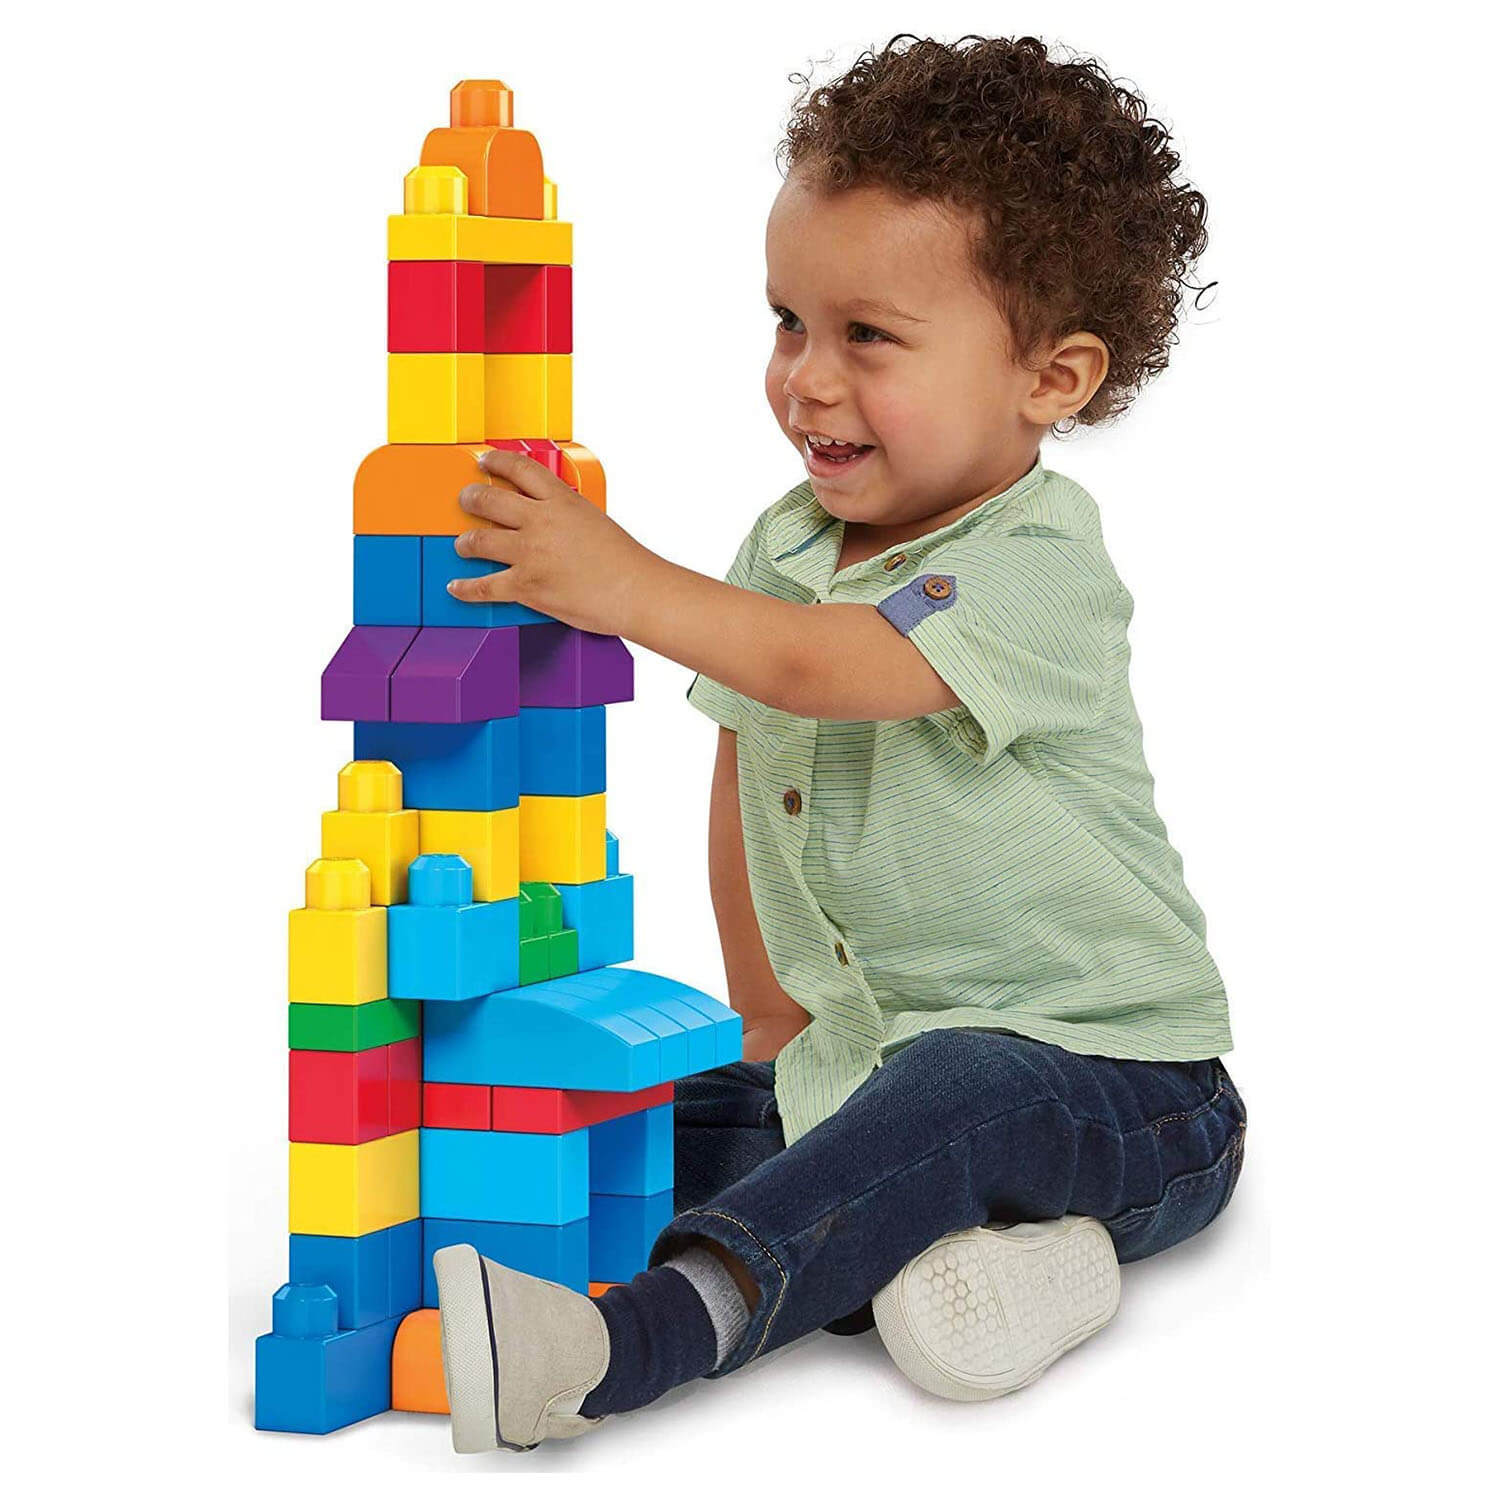 Kid playing with the building set.